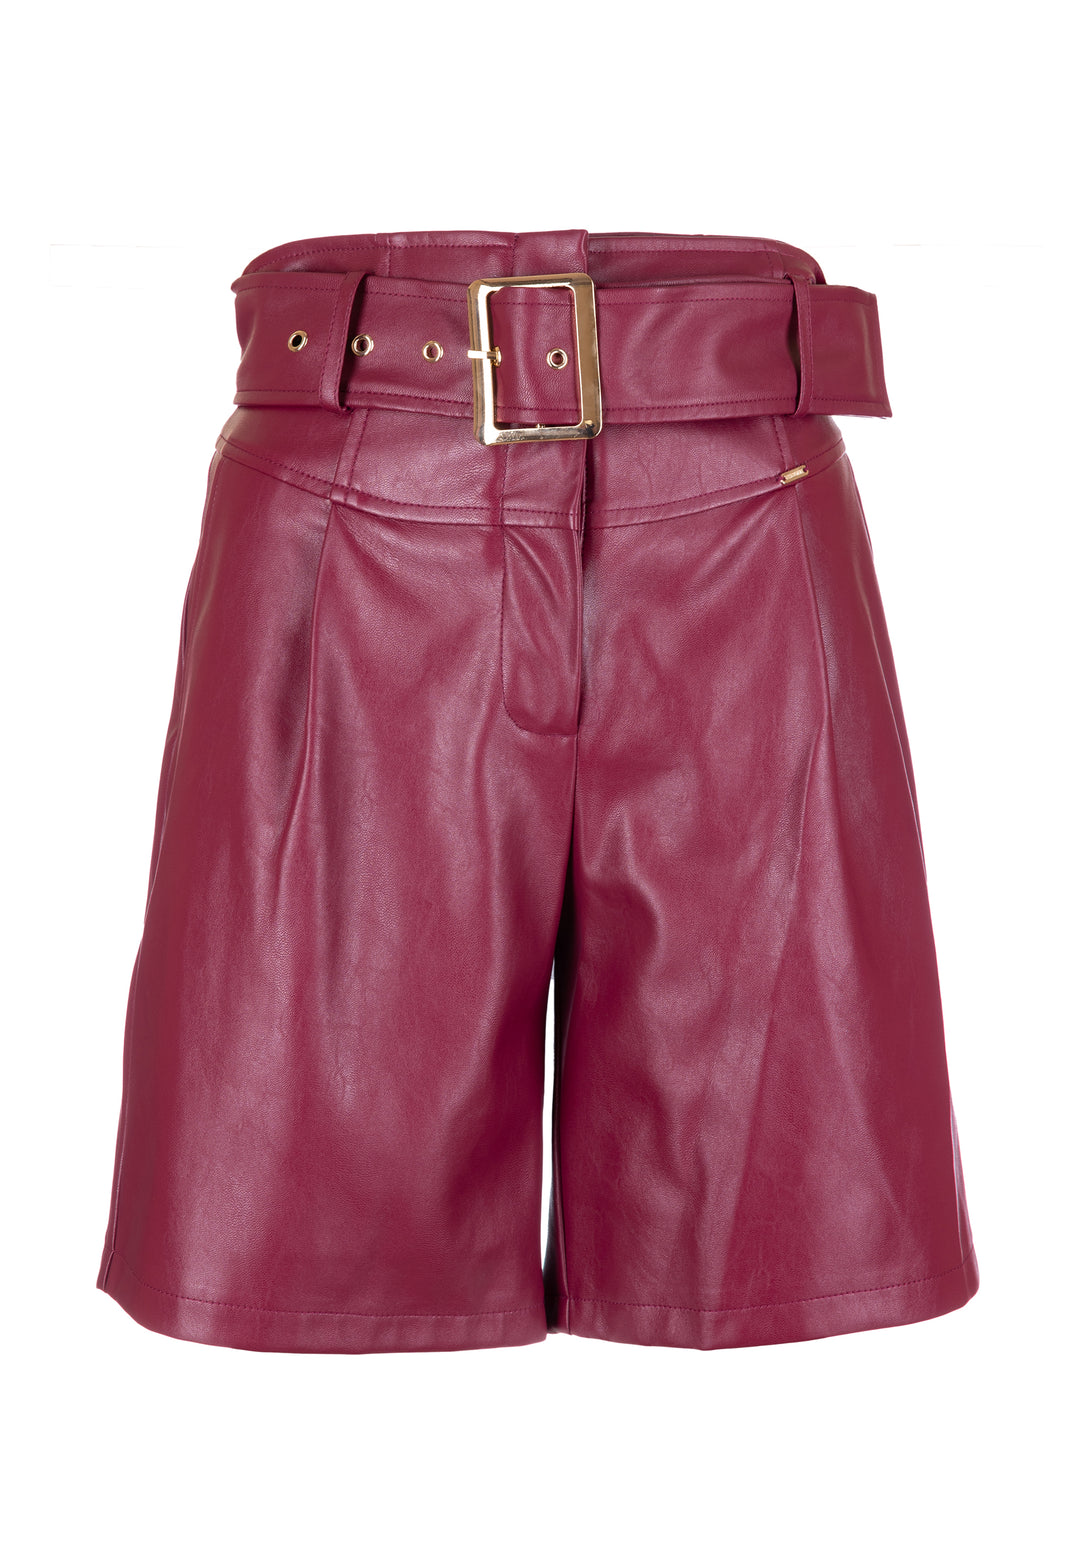 Short pant regular fit made in eco leather